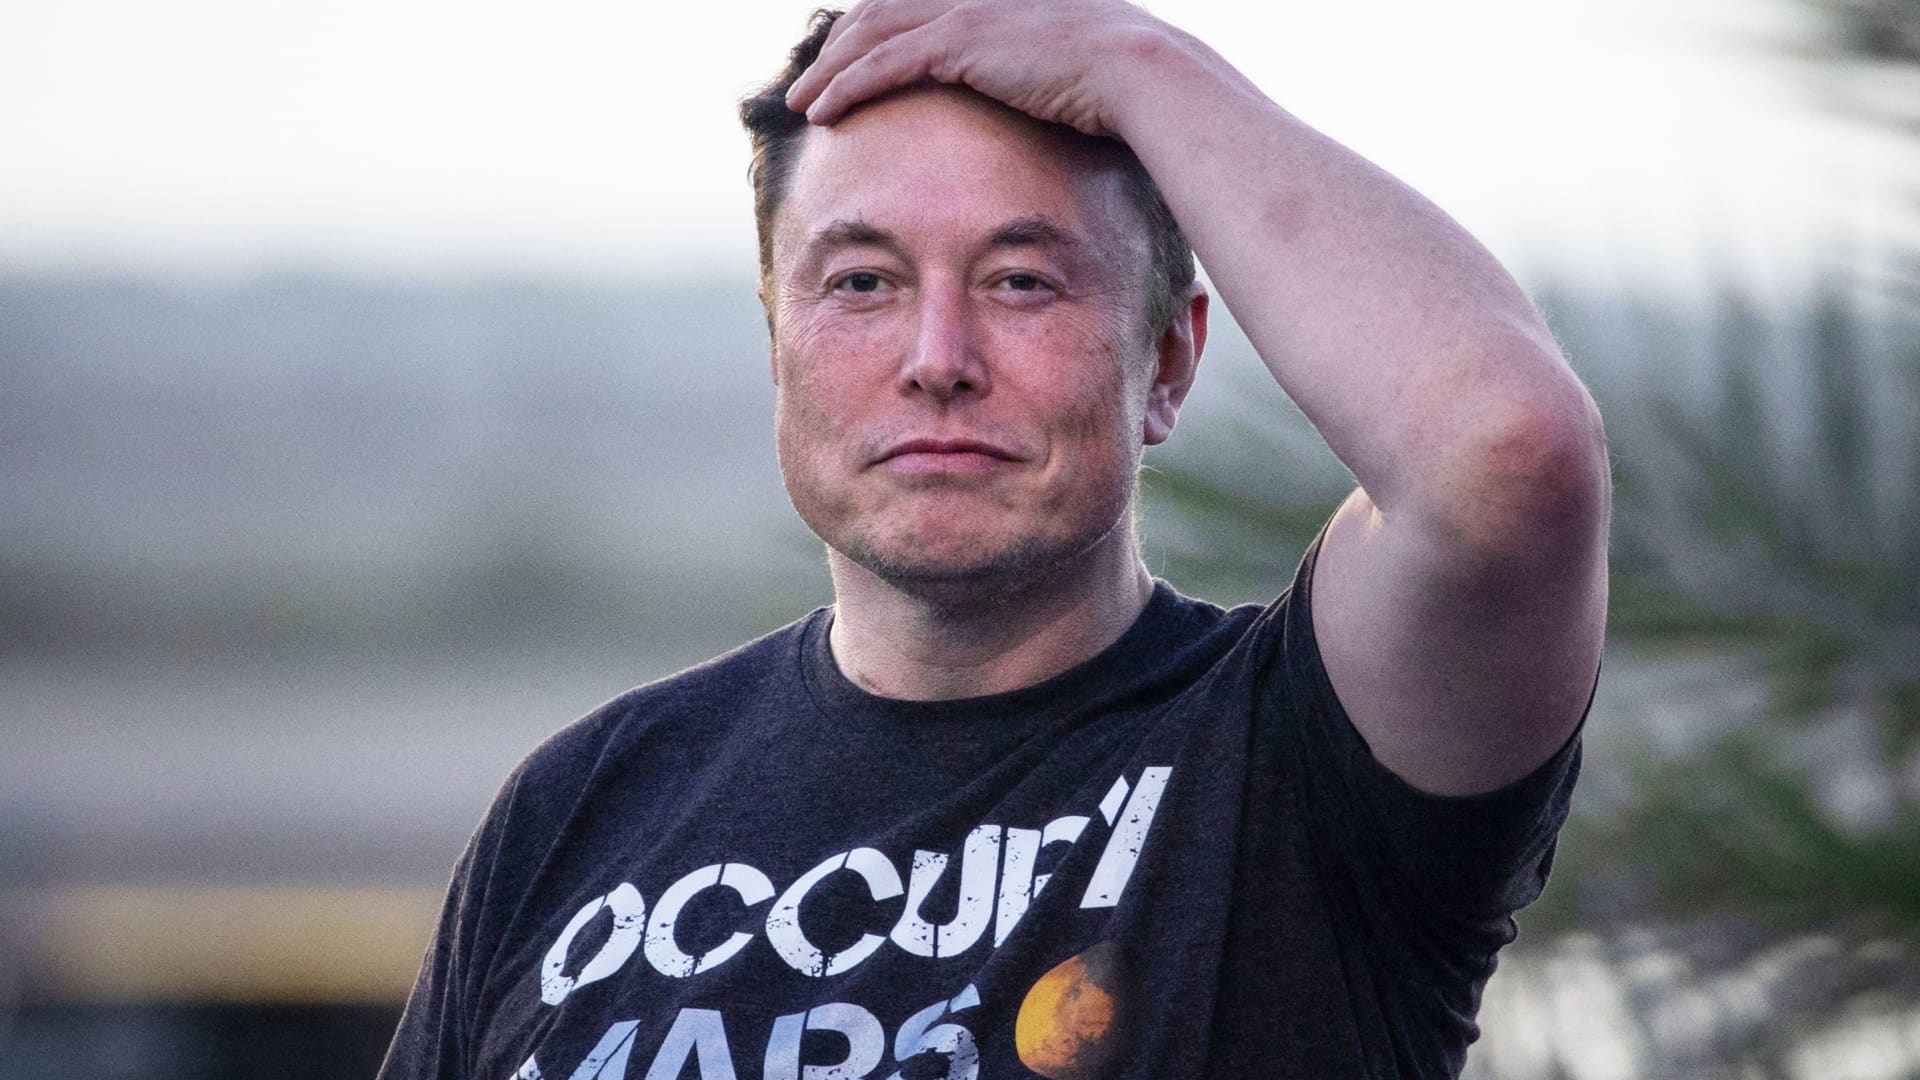 Photo of Elon Musk now in charge of Twitter, CEO and CFO have left, sources say